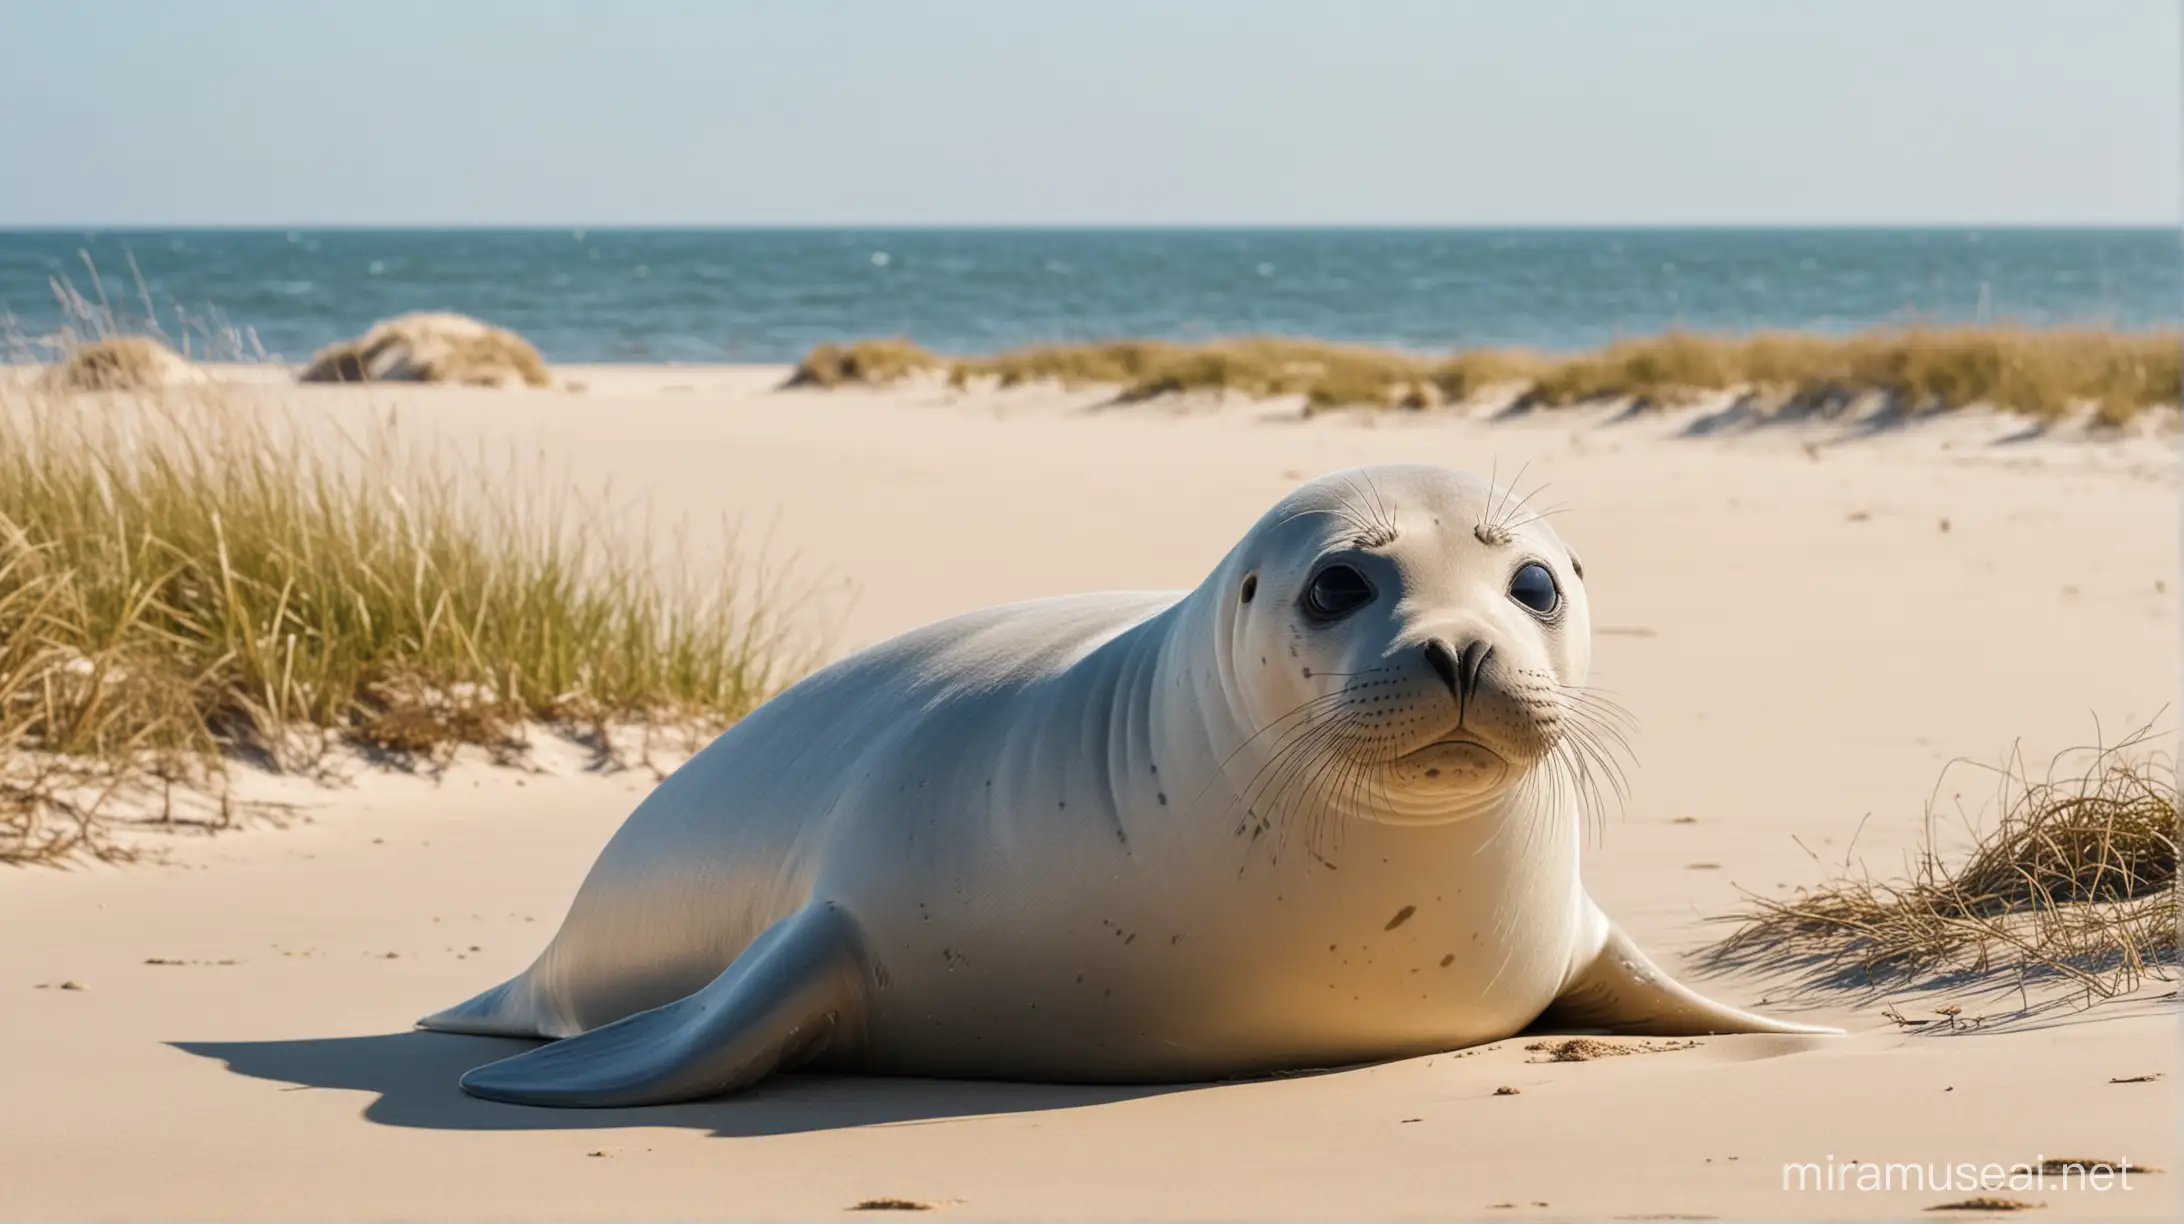 Anime seal, real beach with Dune Nordsee, dunegras, Ocean in Background sunny day